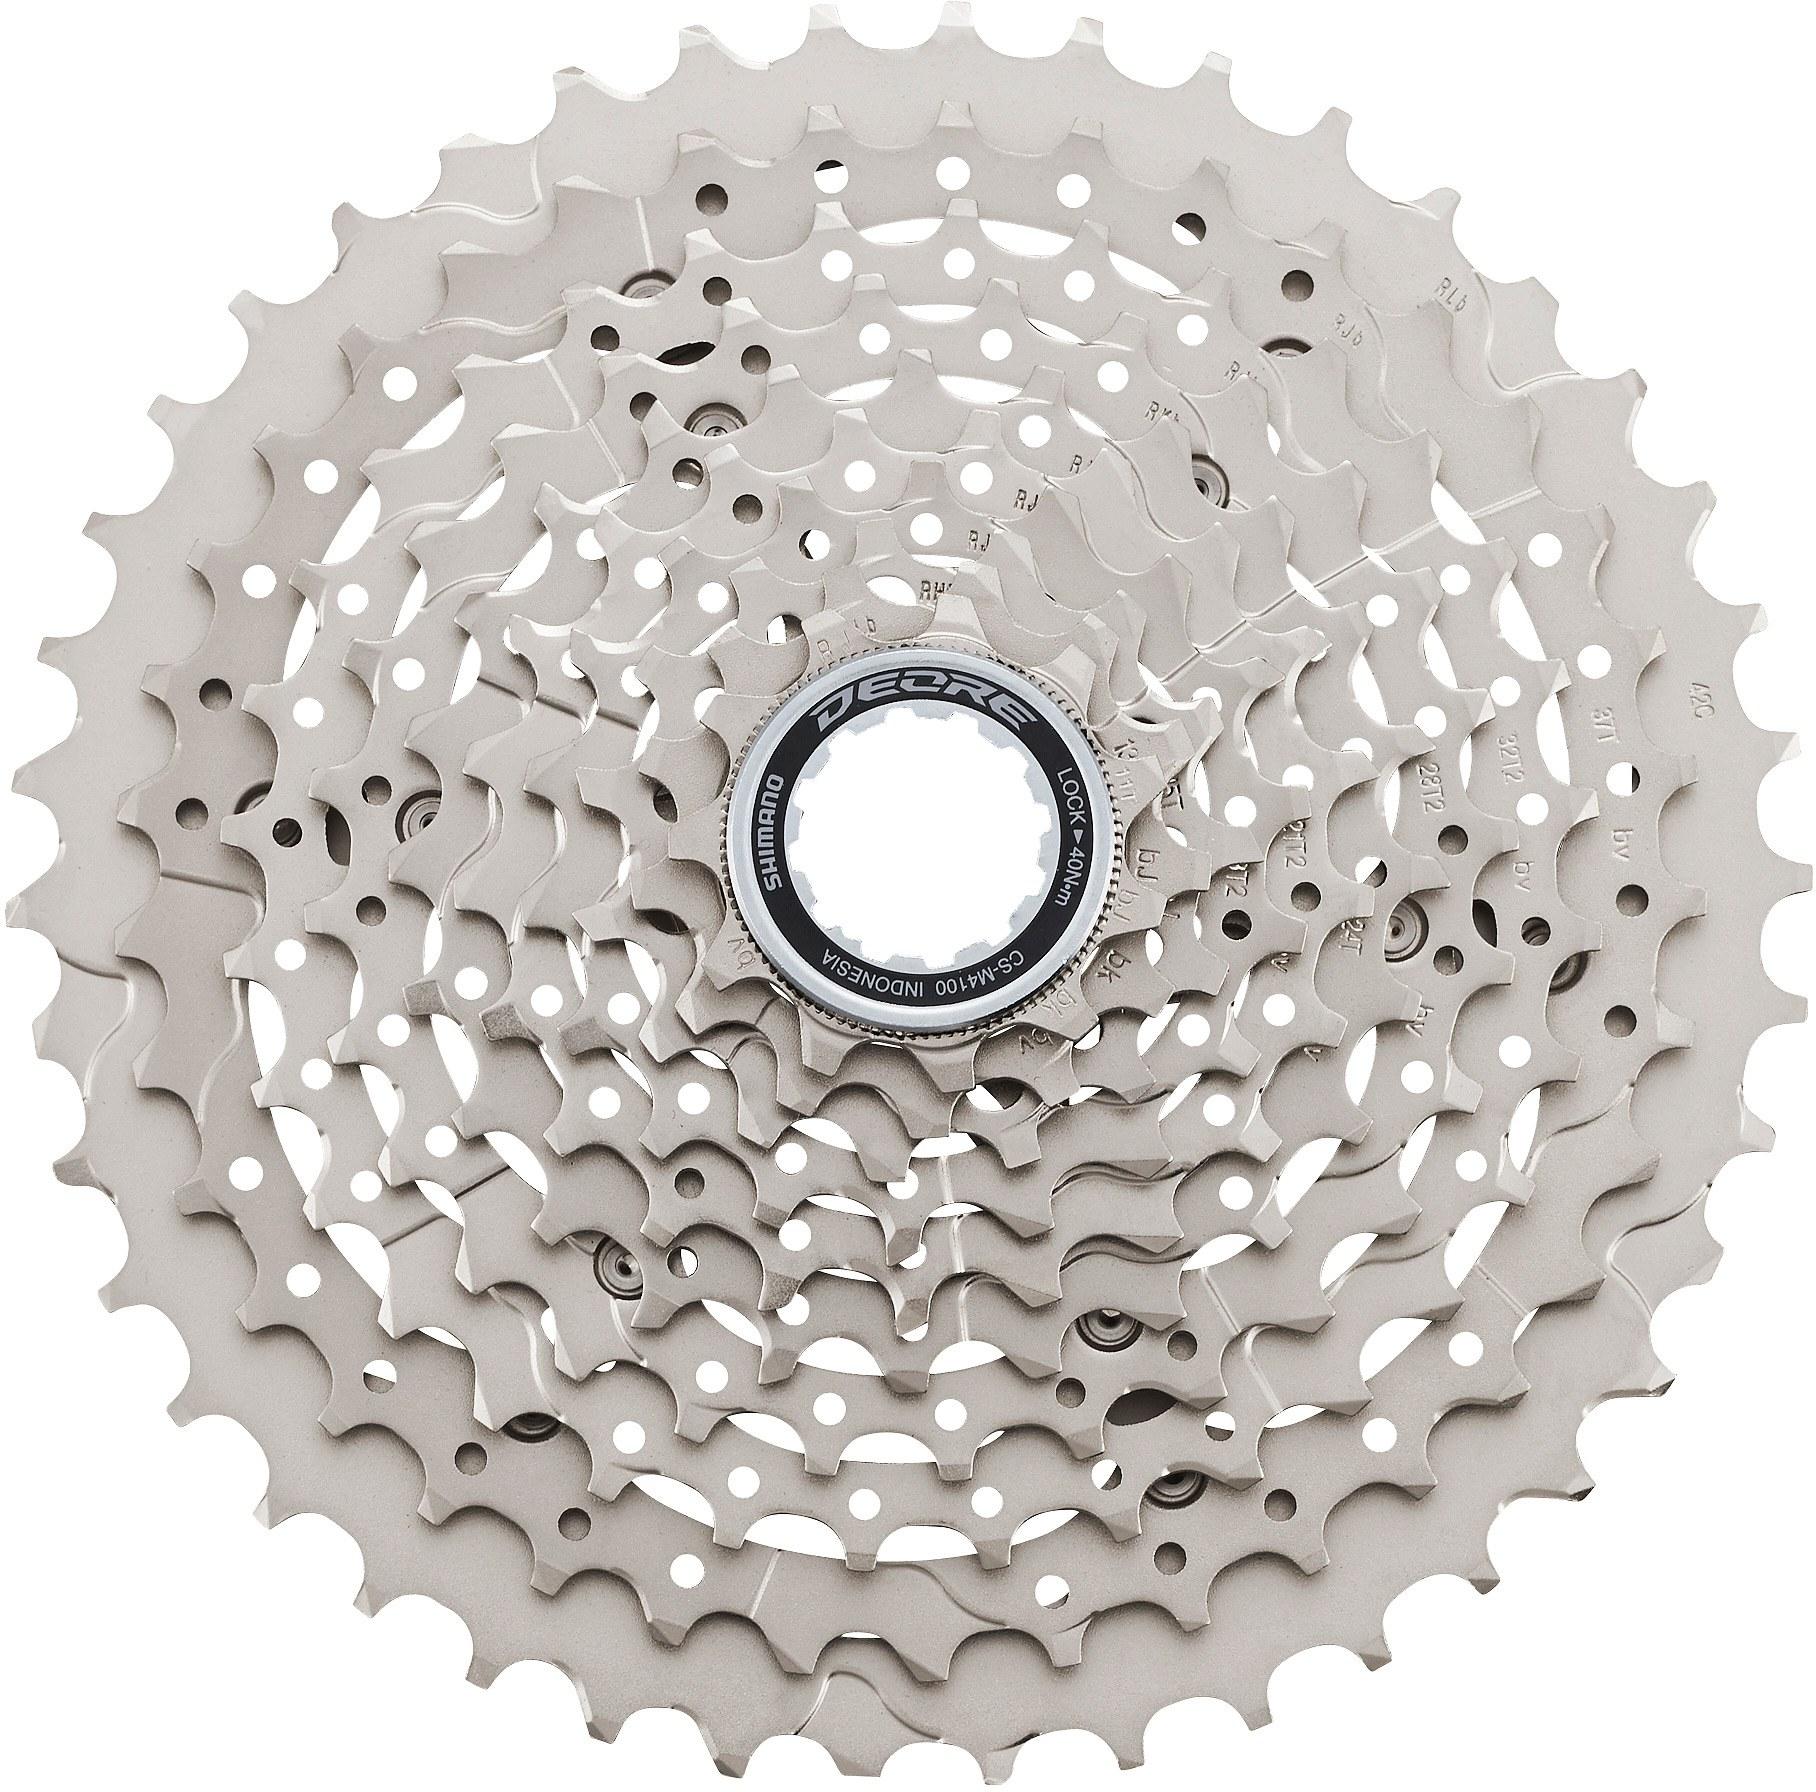 Shimano M4100 Deore 10 Speed Cassette - Silver